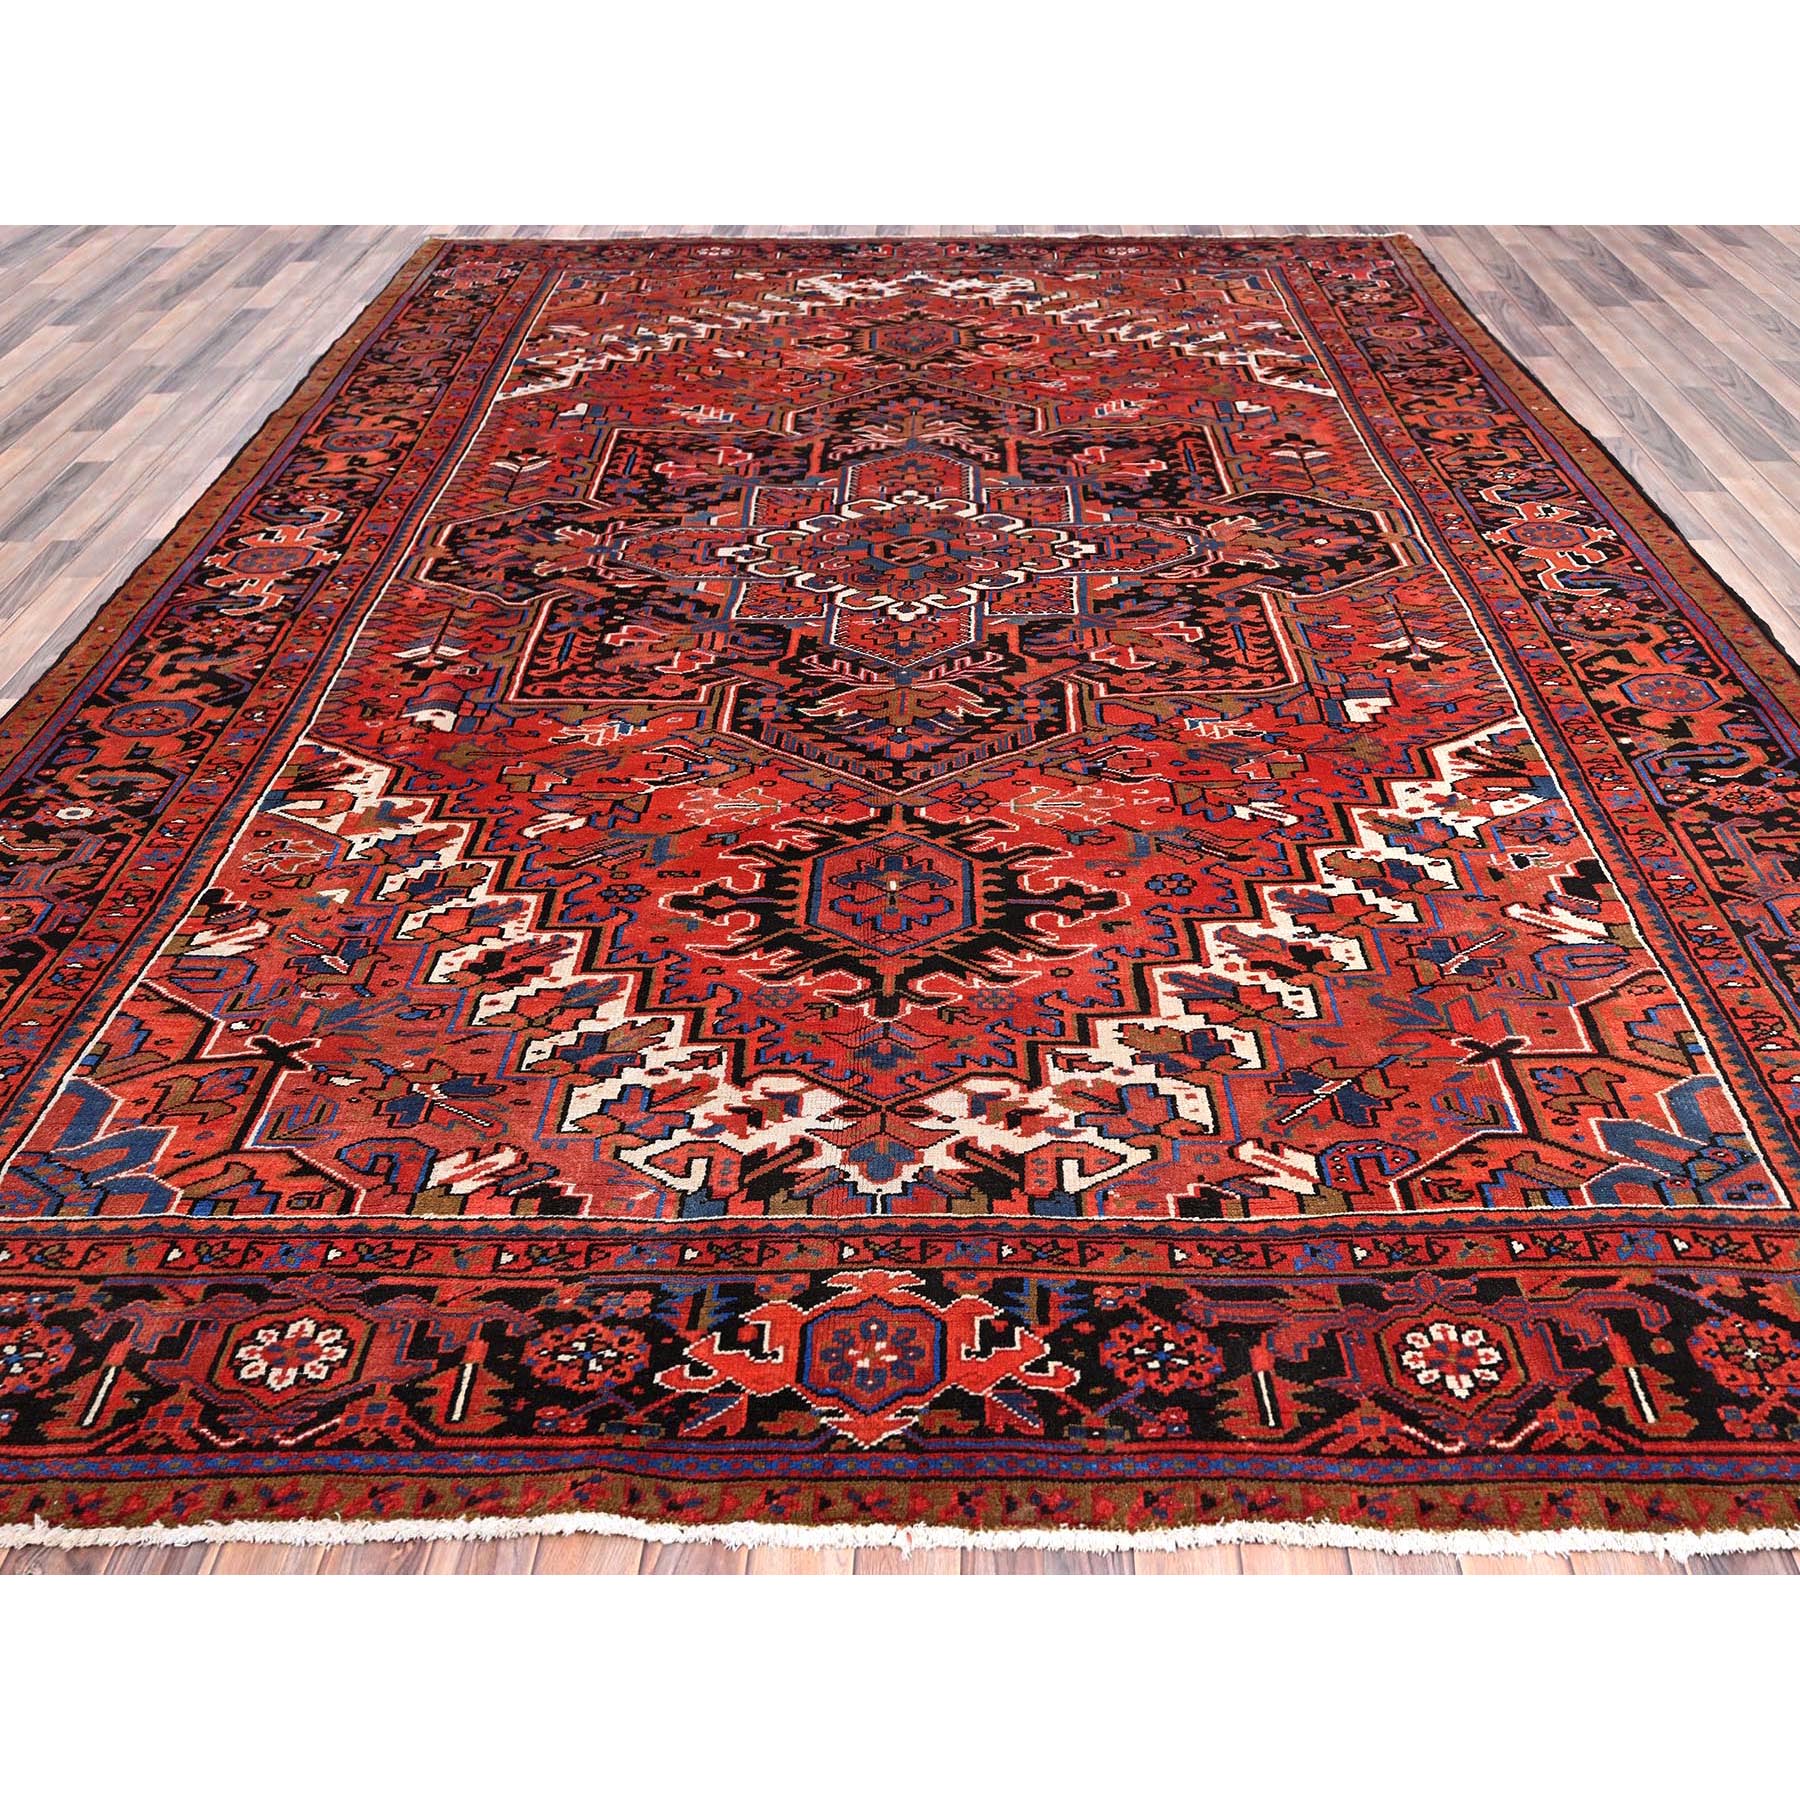 9'8"x13' Imperial Red, Pure Wool, Hand Woven, Semi Antique Persian Heriz, Good Condition, Distressed Feel, Evenly Worn, Oriental Rug 